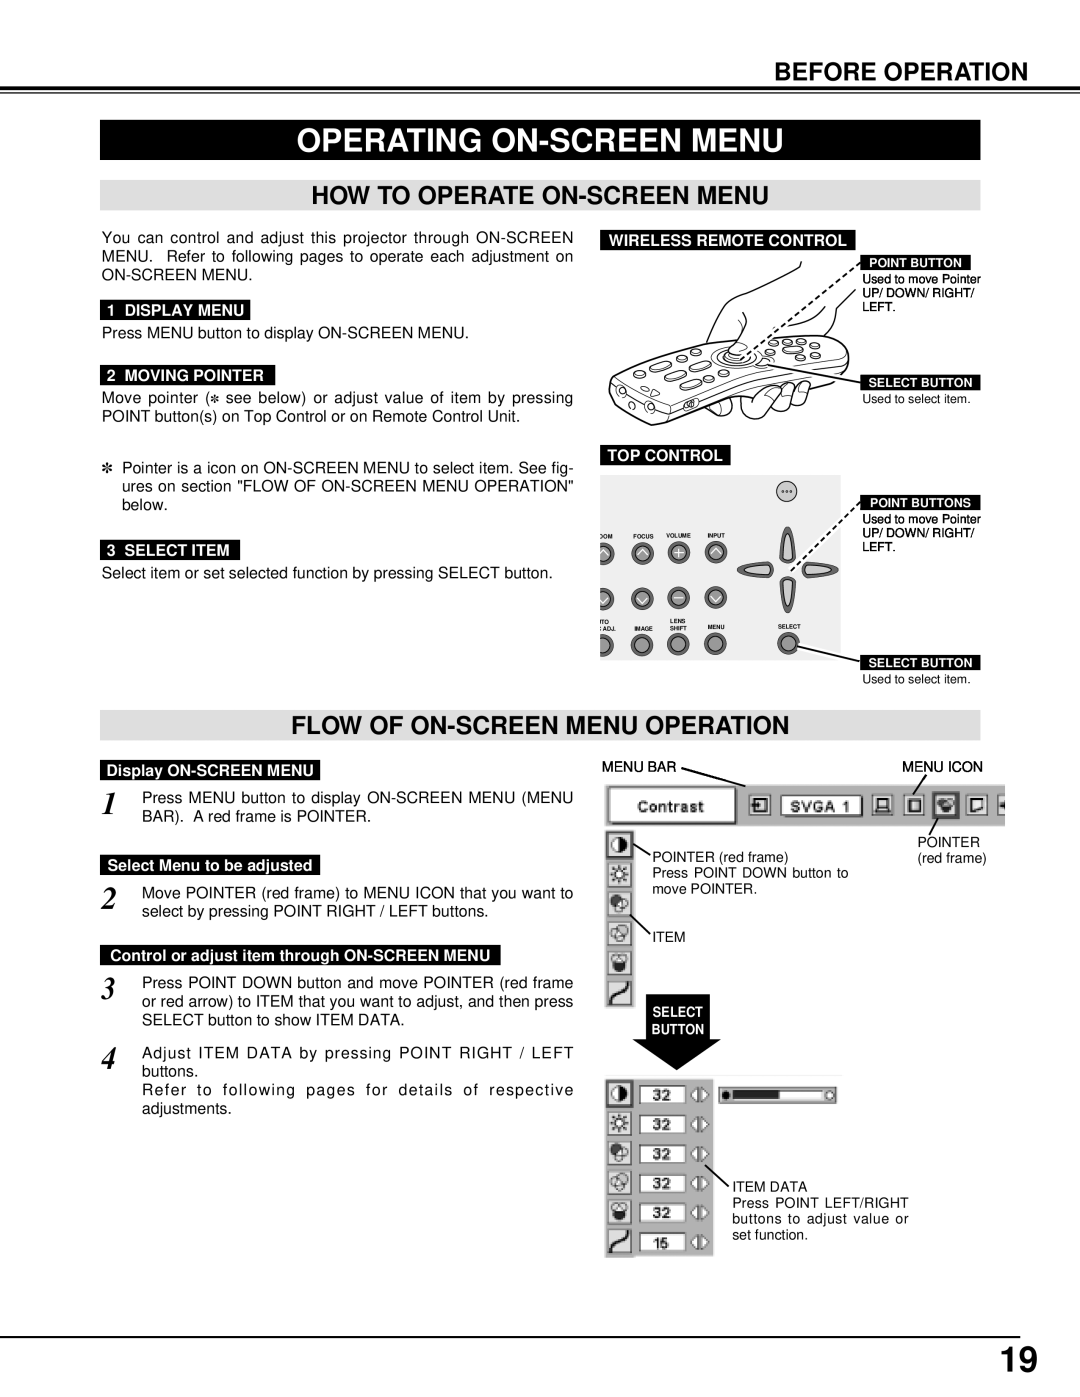 Christie Digital Systems 38-VIV301-01 user manual Operating On-Screen Menu, How To Operate On-Screen Menu, Before Operation 